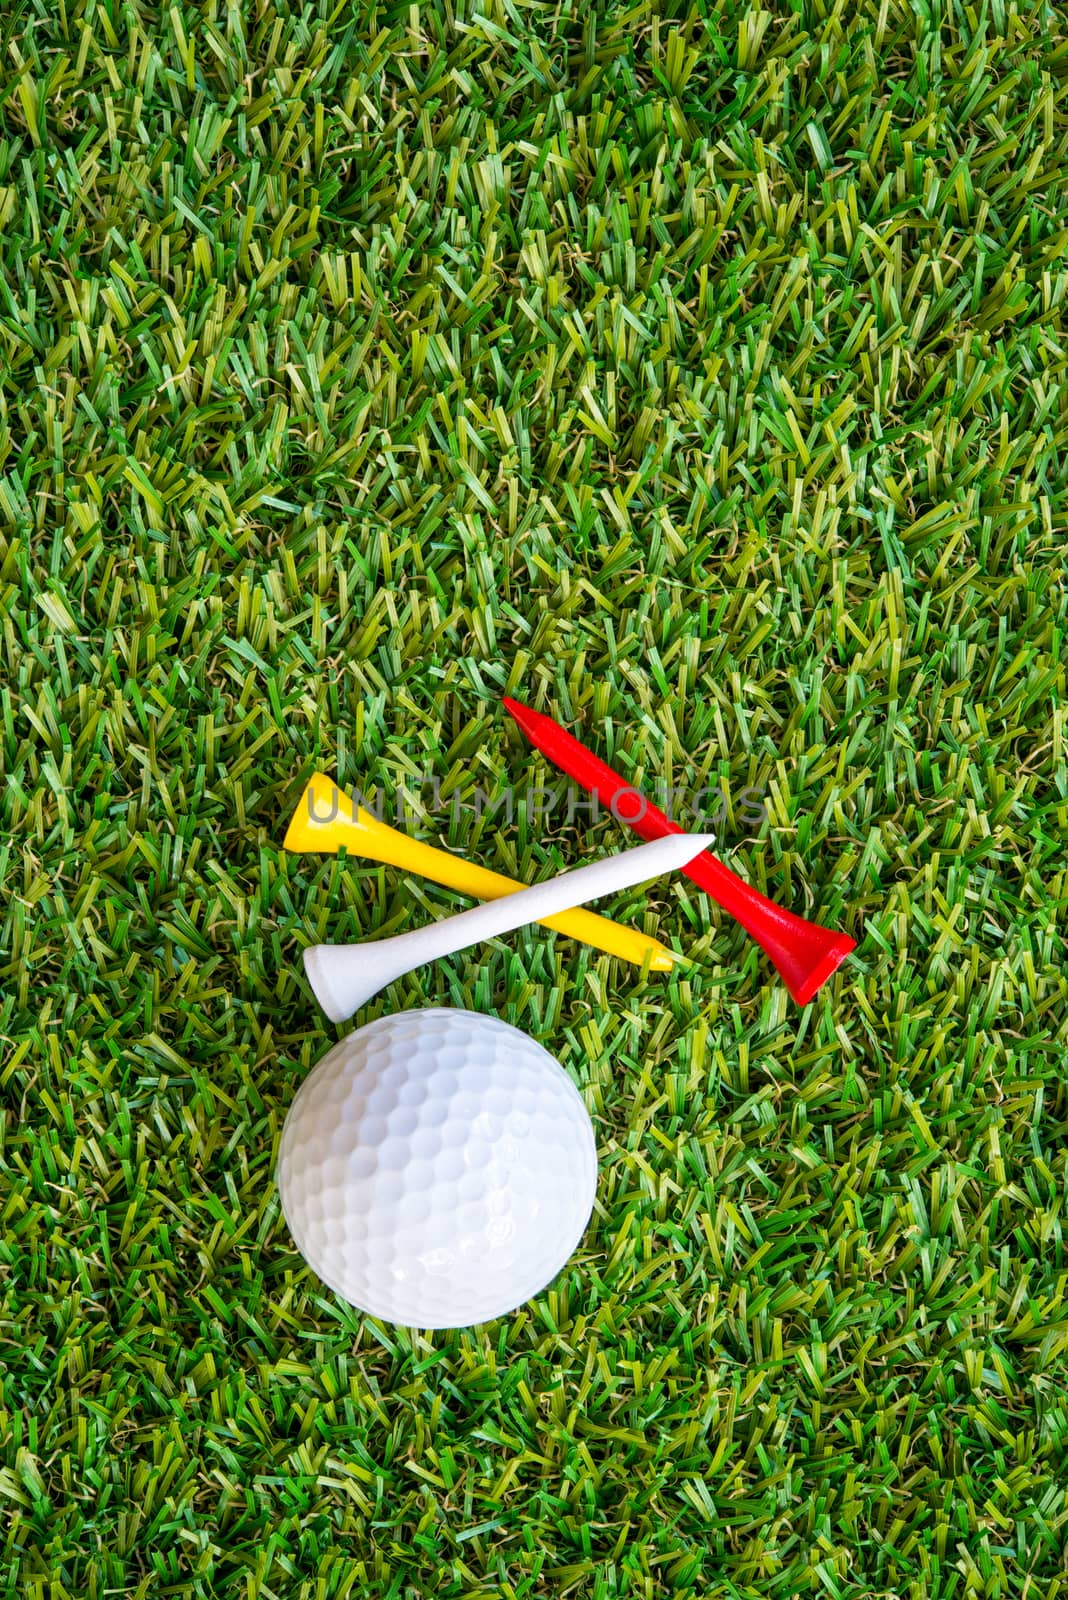 golf ball and tee on grass by antpkr